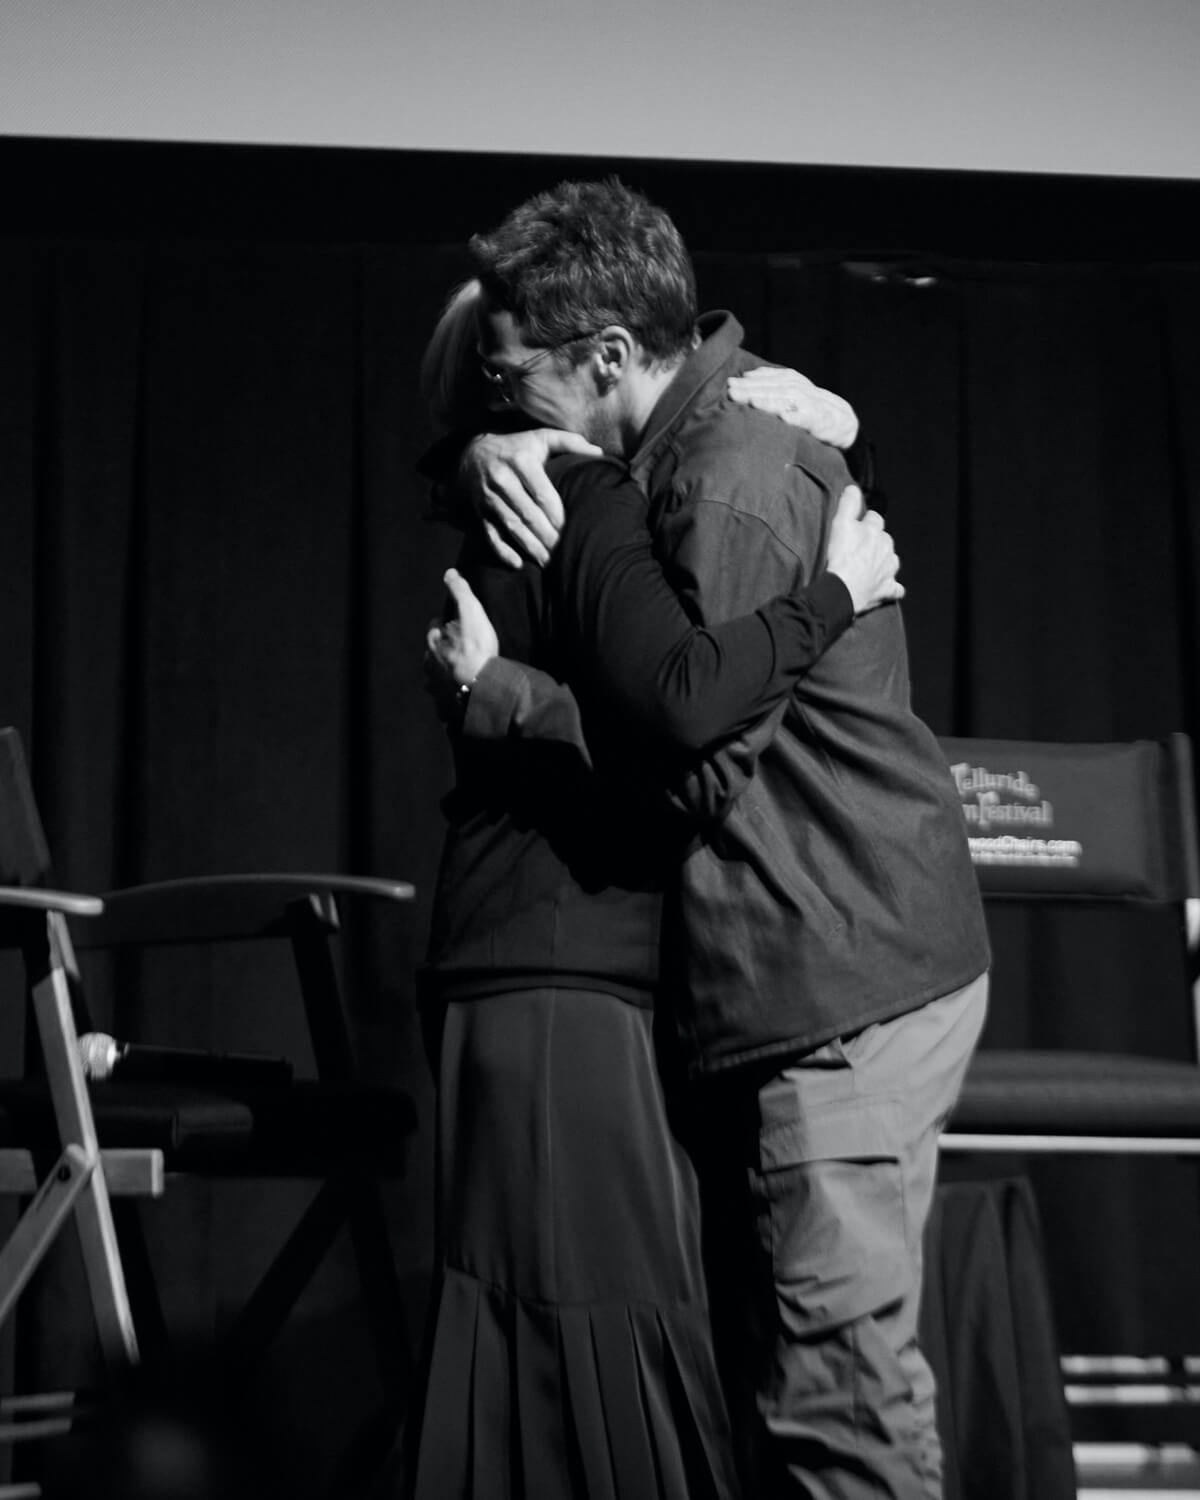 A black and white shot of Jane Campion and Benedict Cumberbatch at Telluride Film Festival, 2021, embracing each other on a stage.